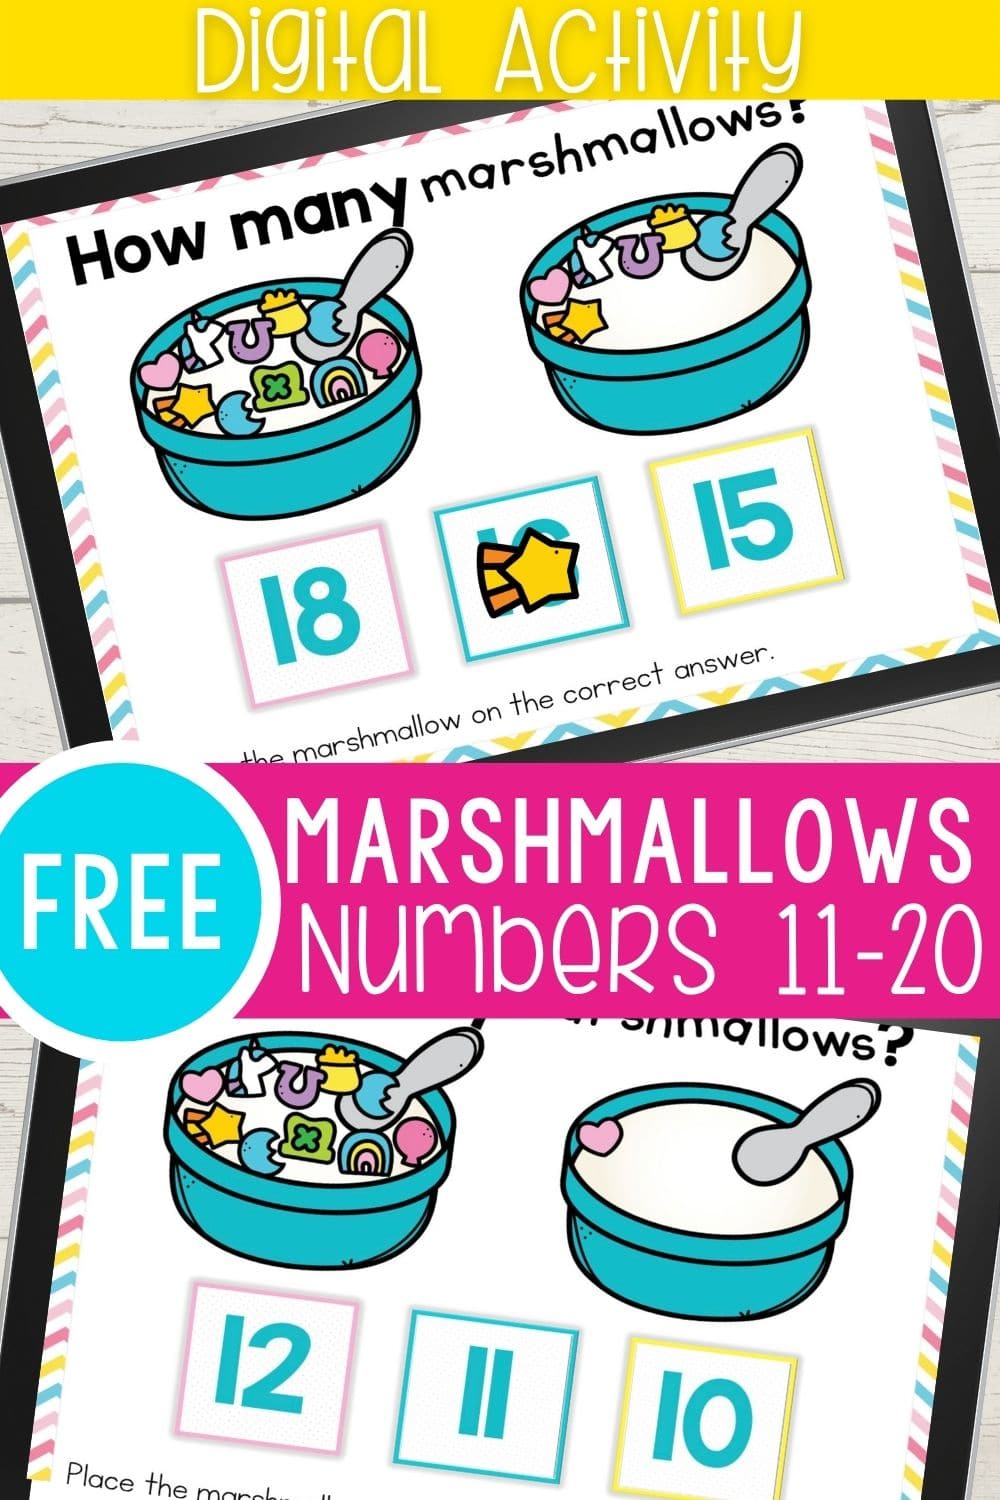 Free Marshmallows Numbers 11-20 Digital Activity